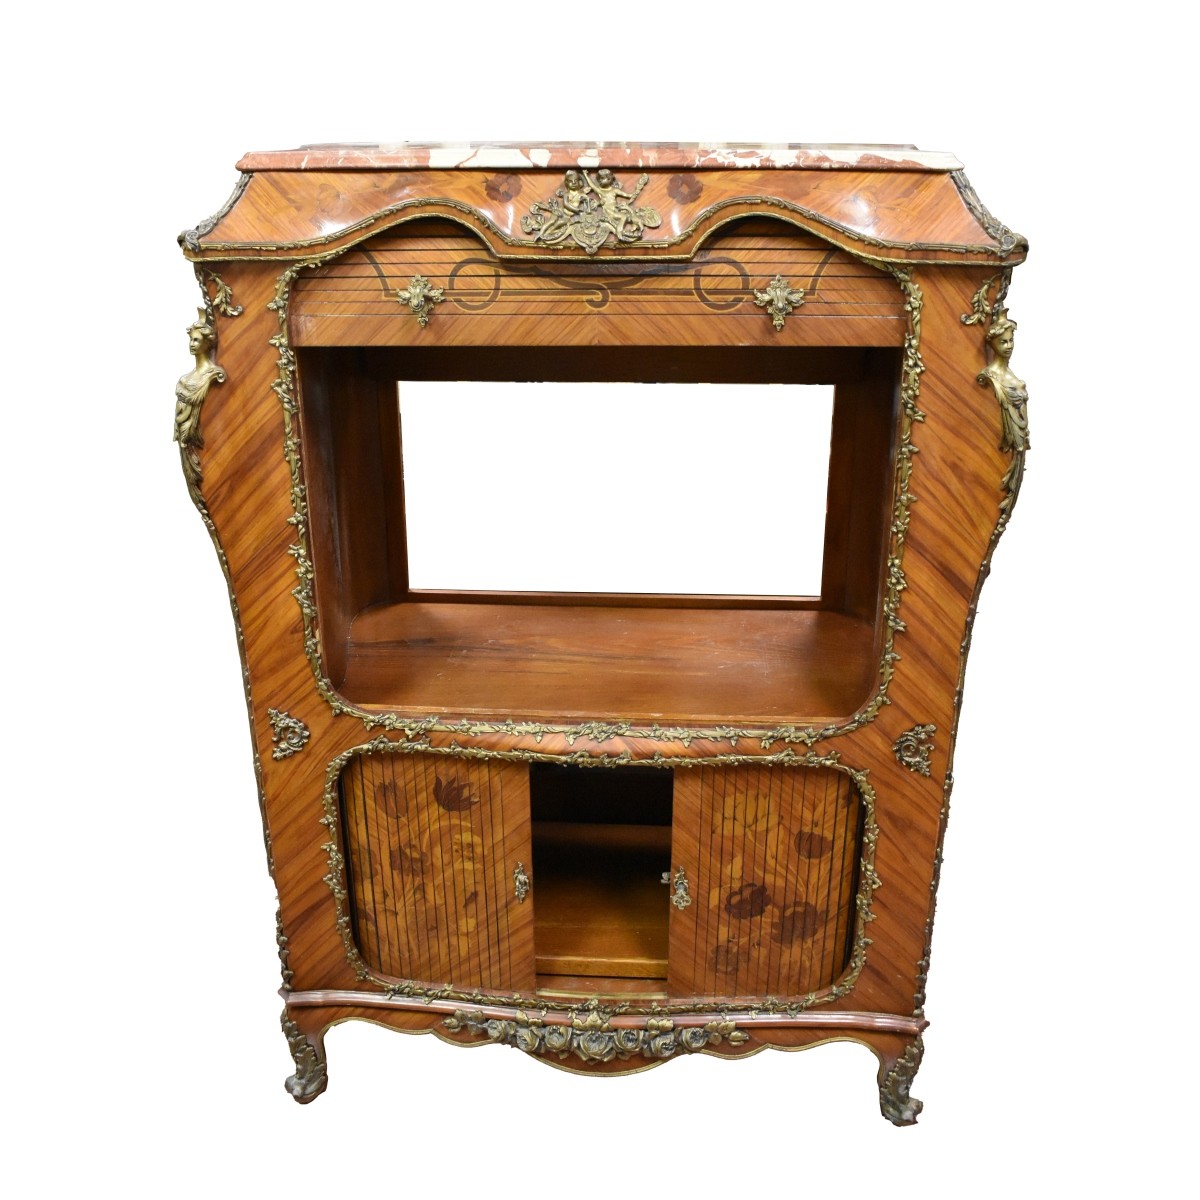 Early 20th C. Louis XVI Style Cabinet